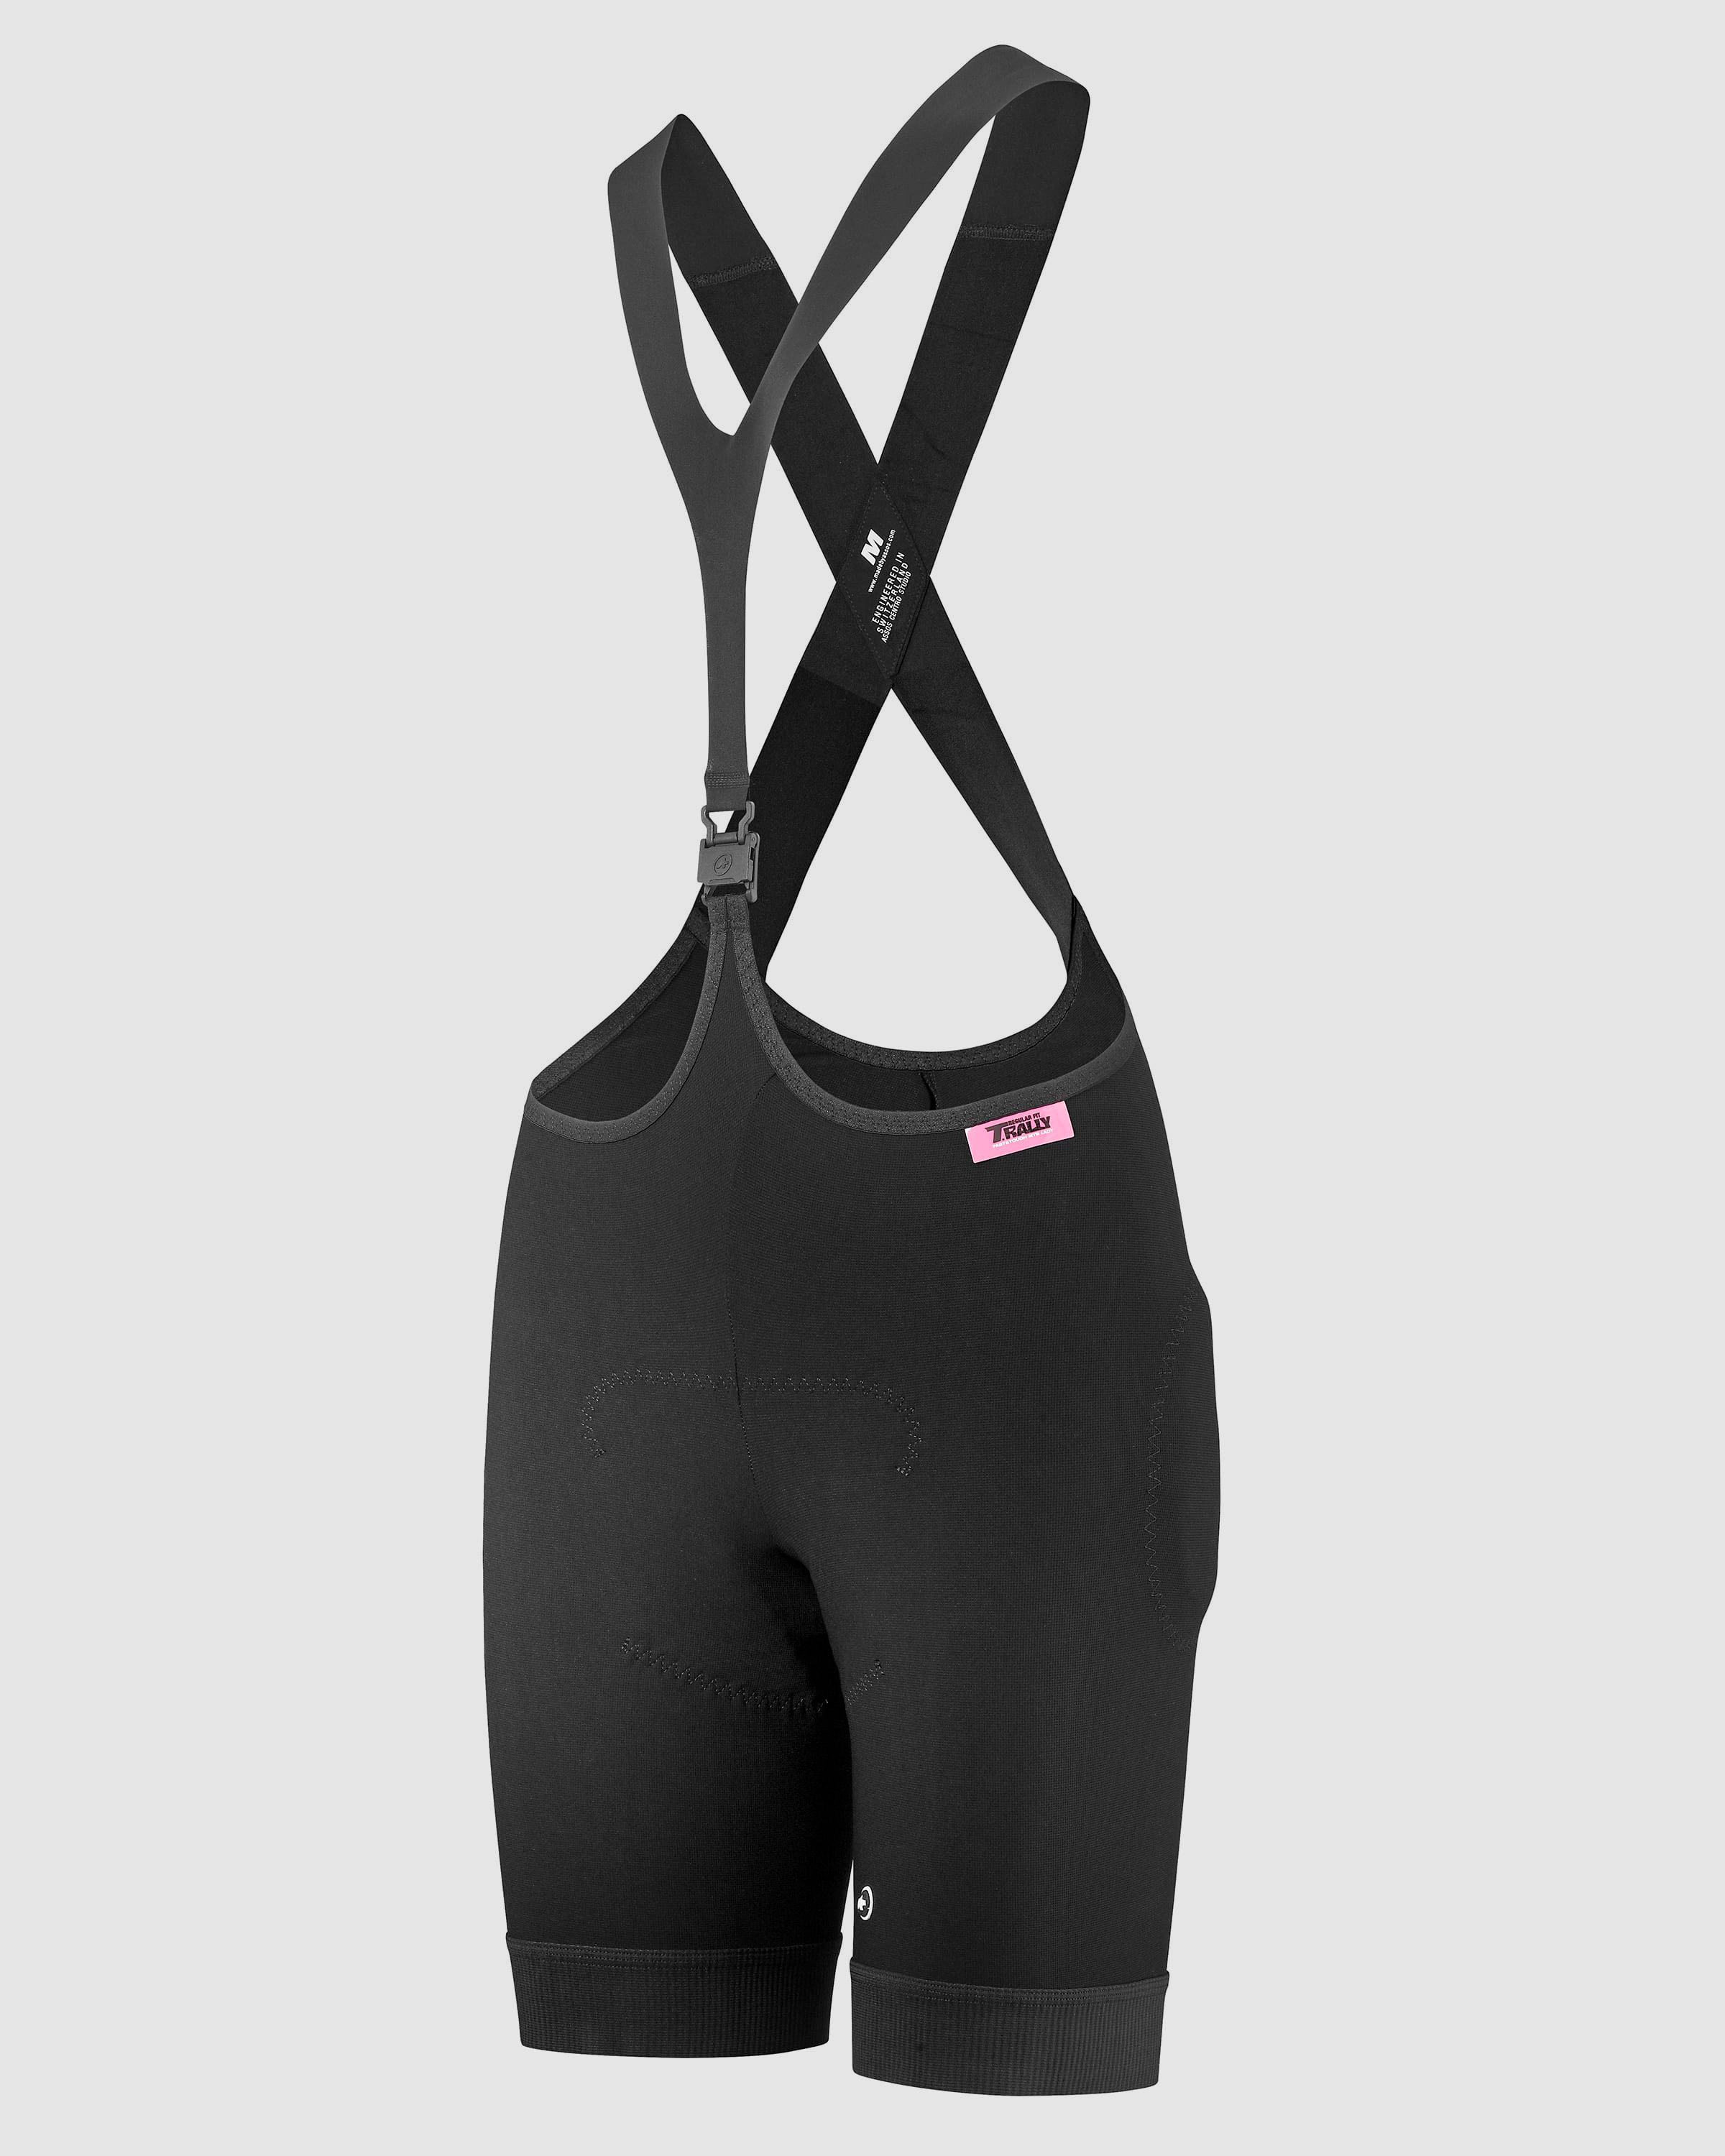 T.RALLYSHORTS_S7 LADY - ASSOS Of Switzerland - Official Outlet